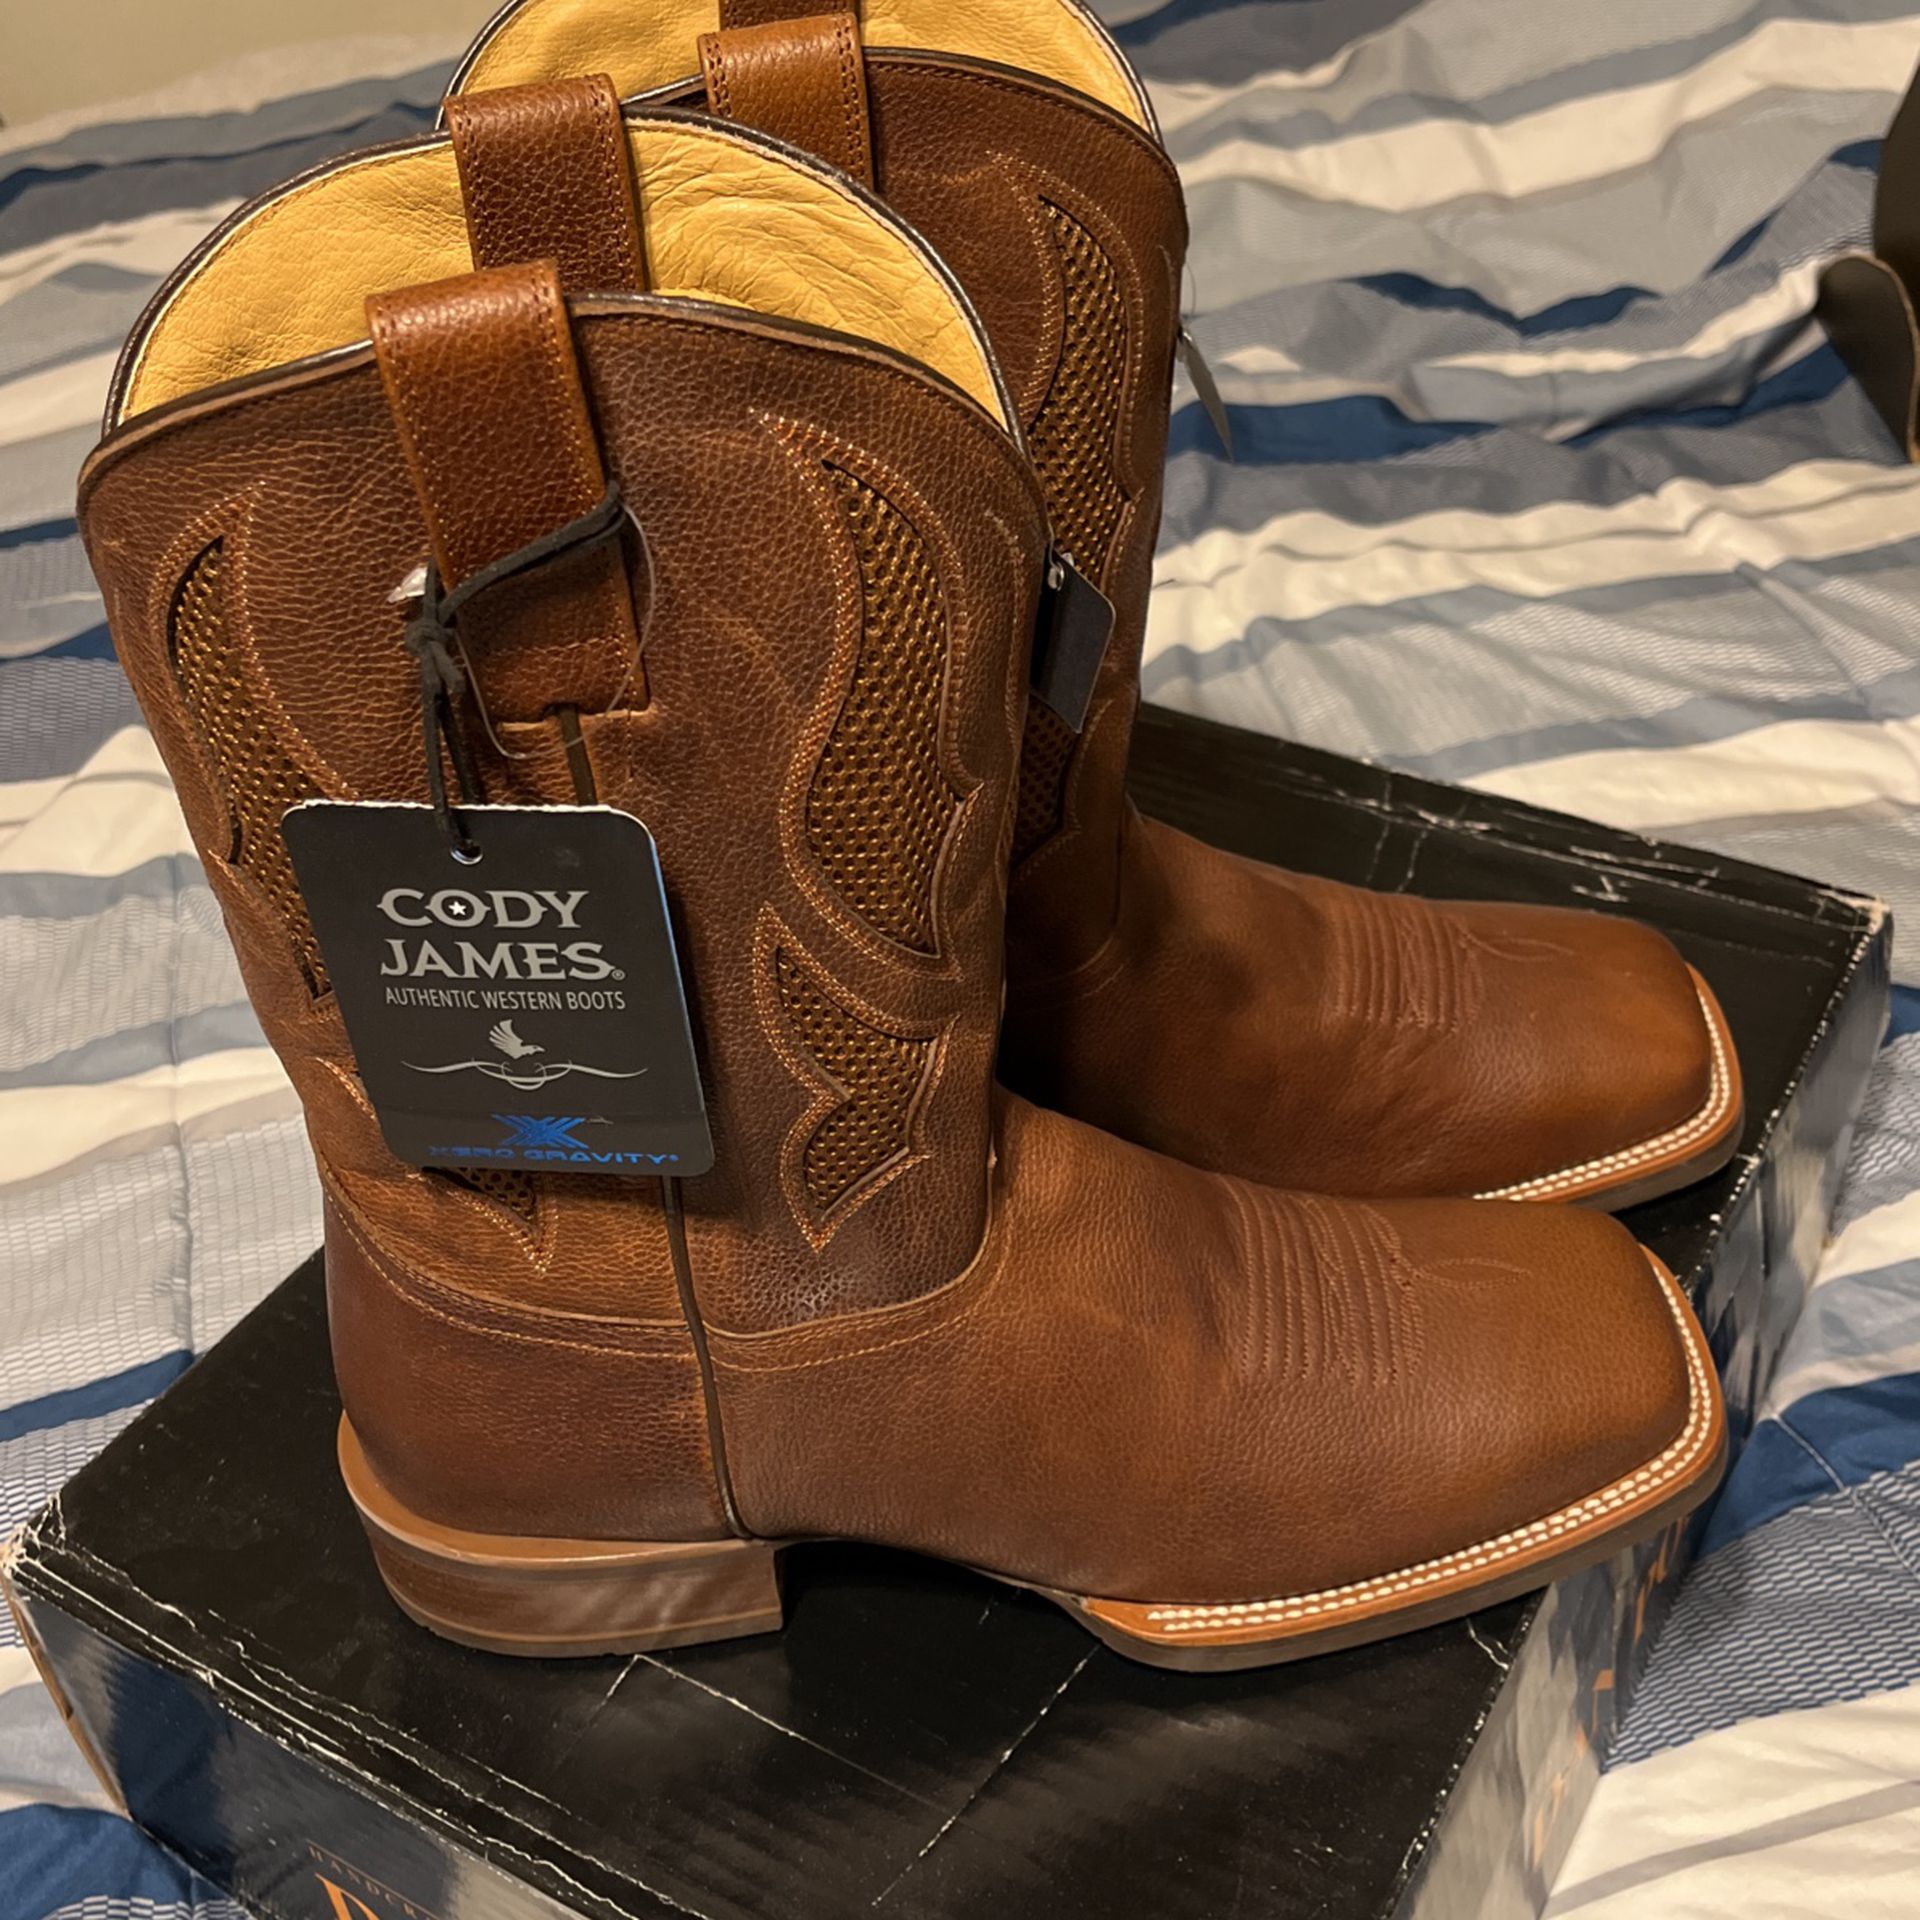 Cody James Leather Western Boots